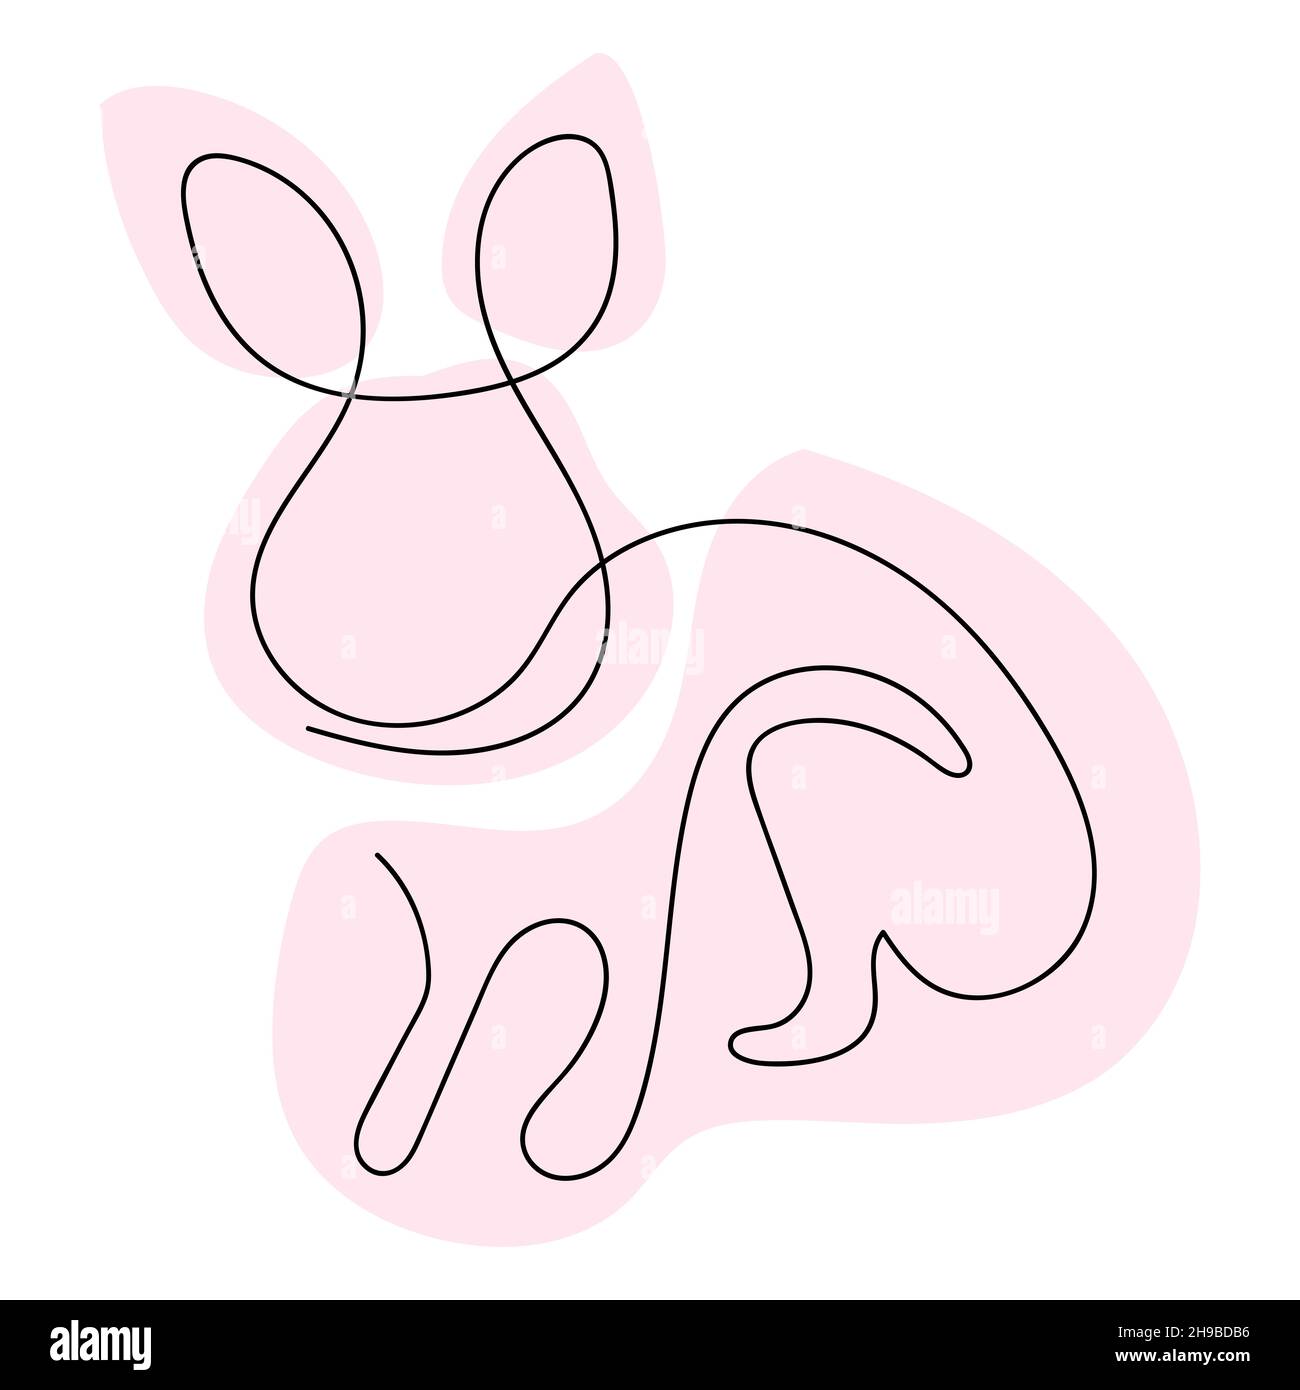 Rabbit line drawing Cut Out Stock Images & Pictures - Alamy